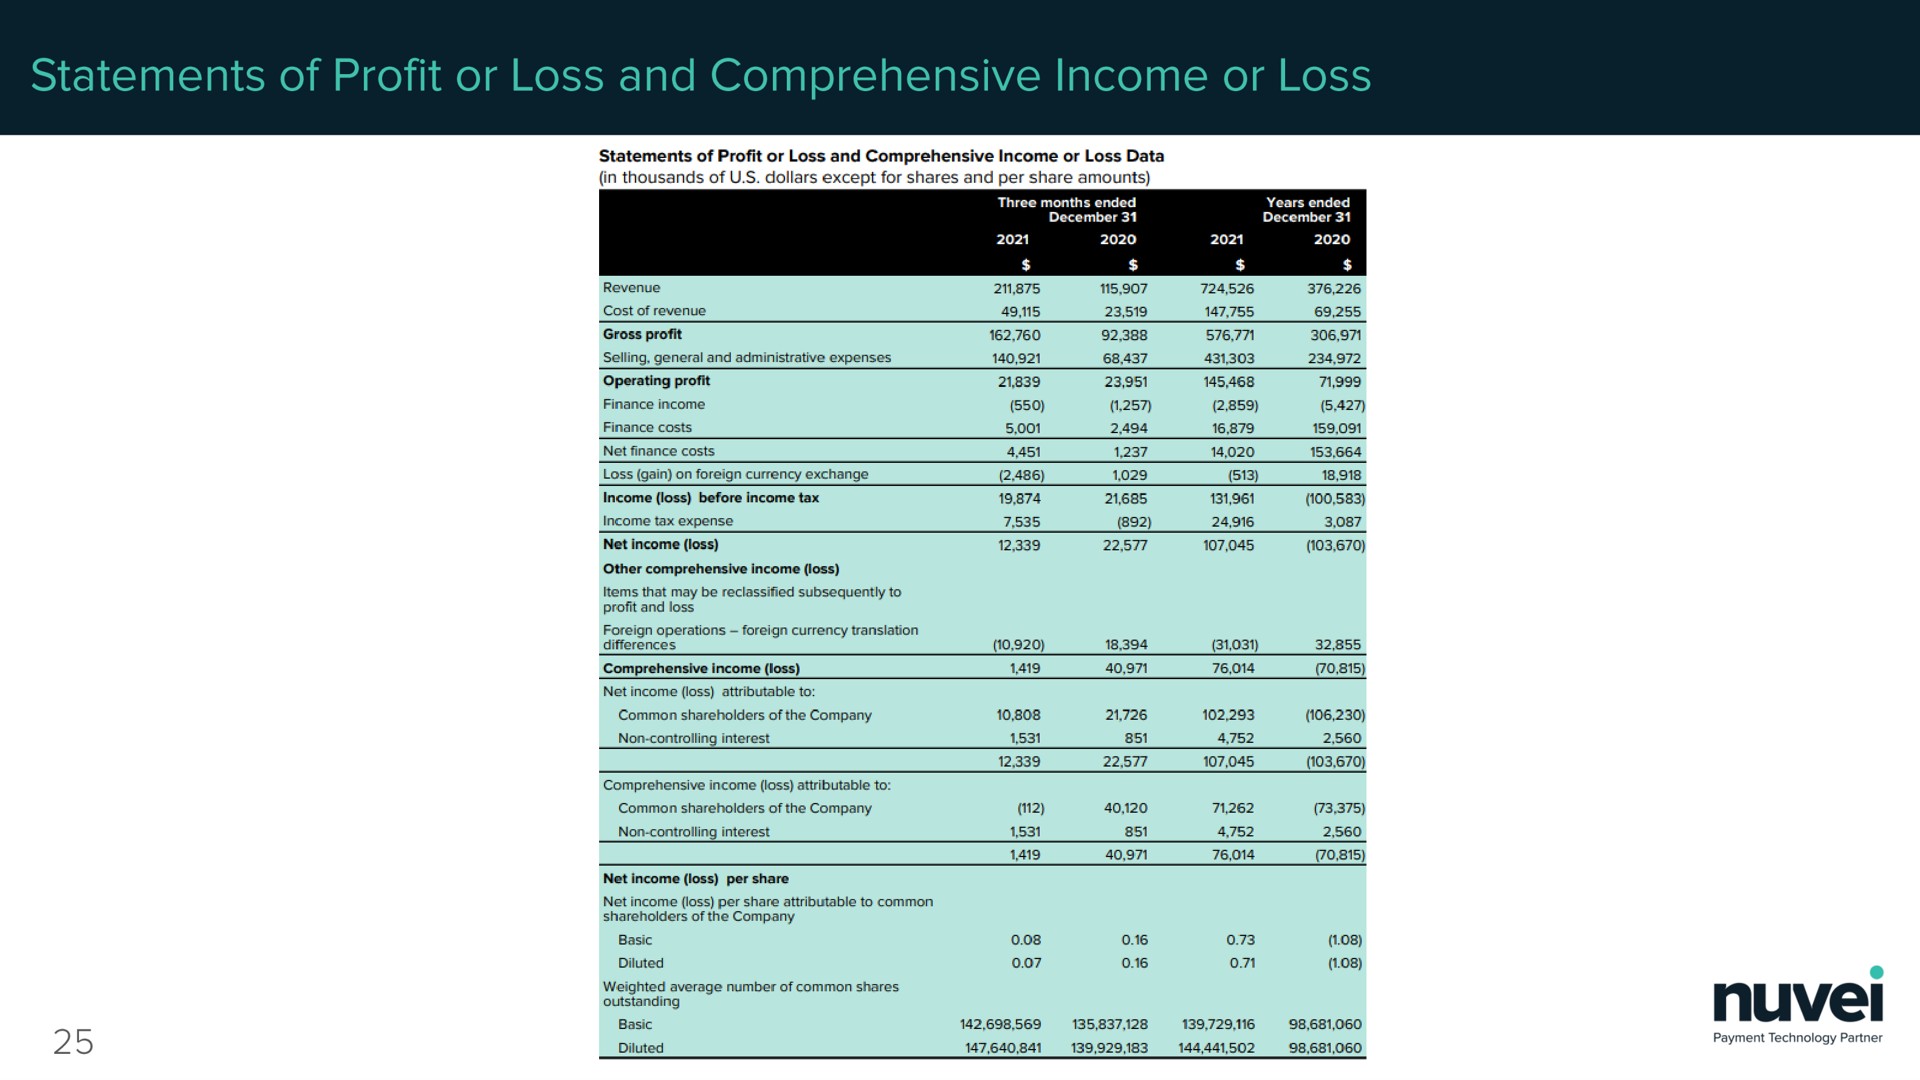 statements of profit or loss and comprehensive income or loss | Nuvei